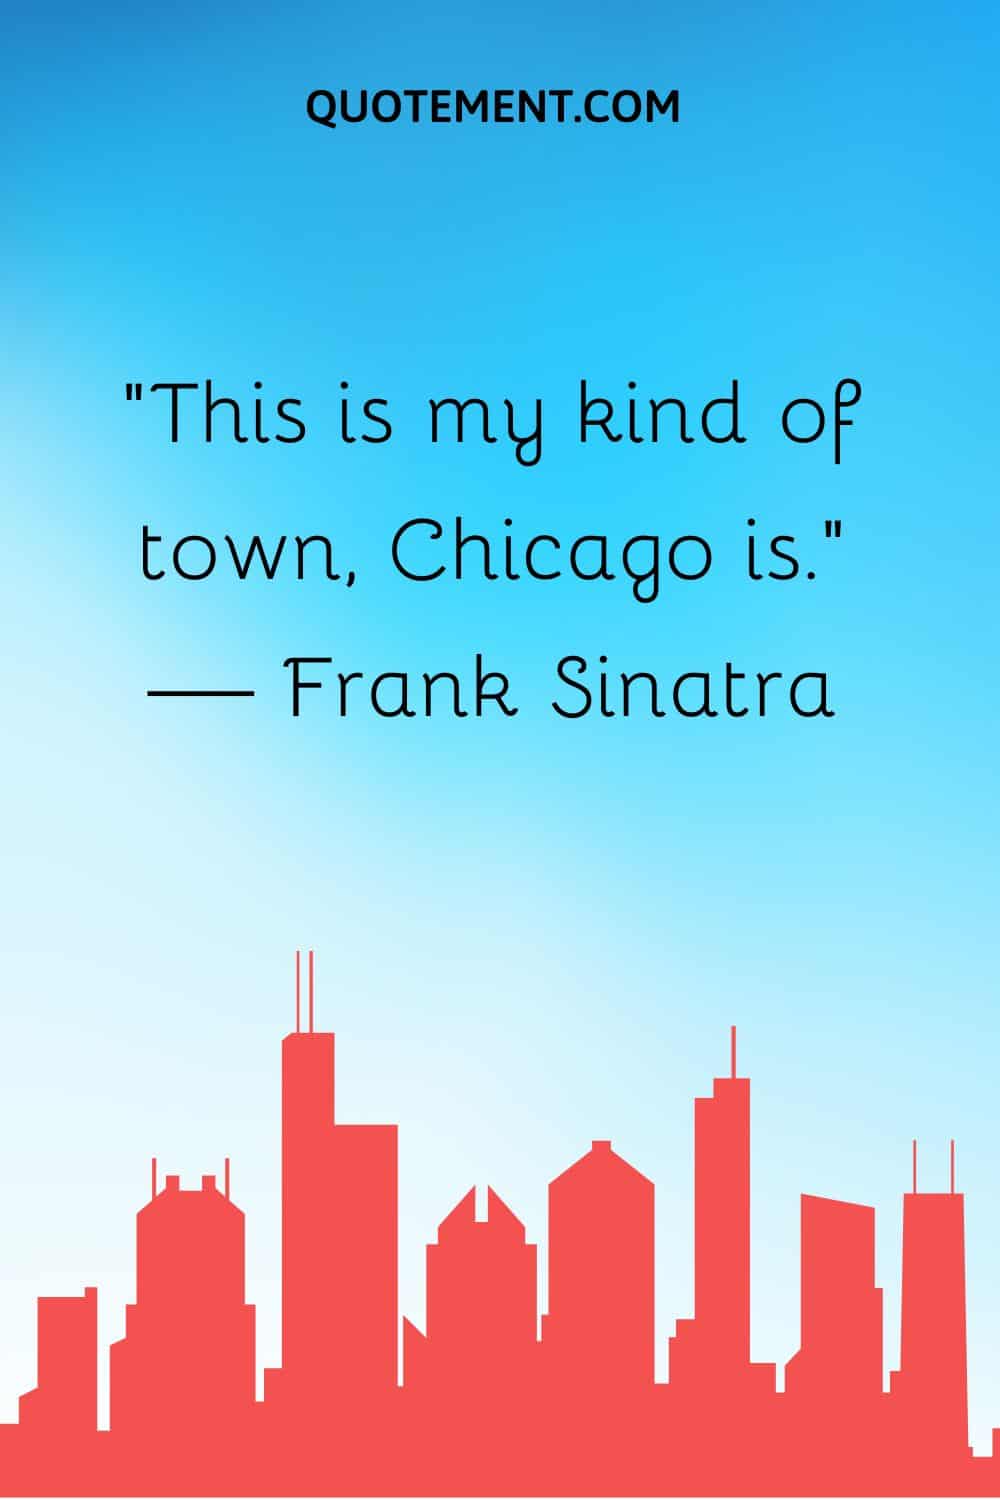 “This is my kind of town, Chicago is.” — Frank Sinatra